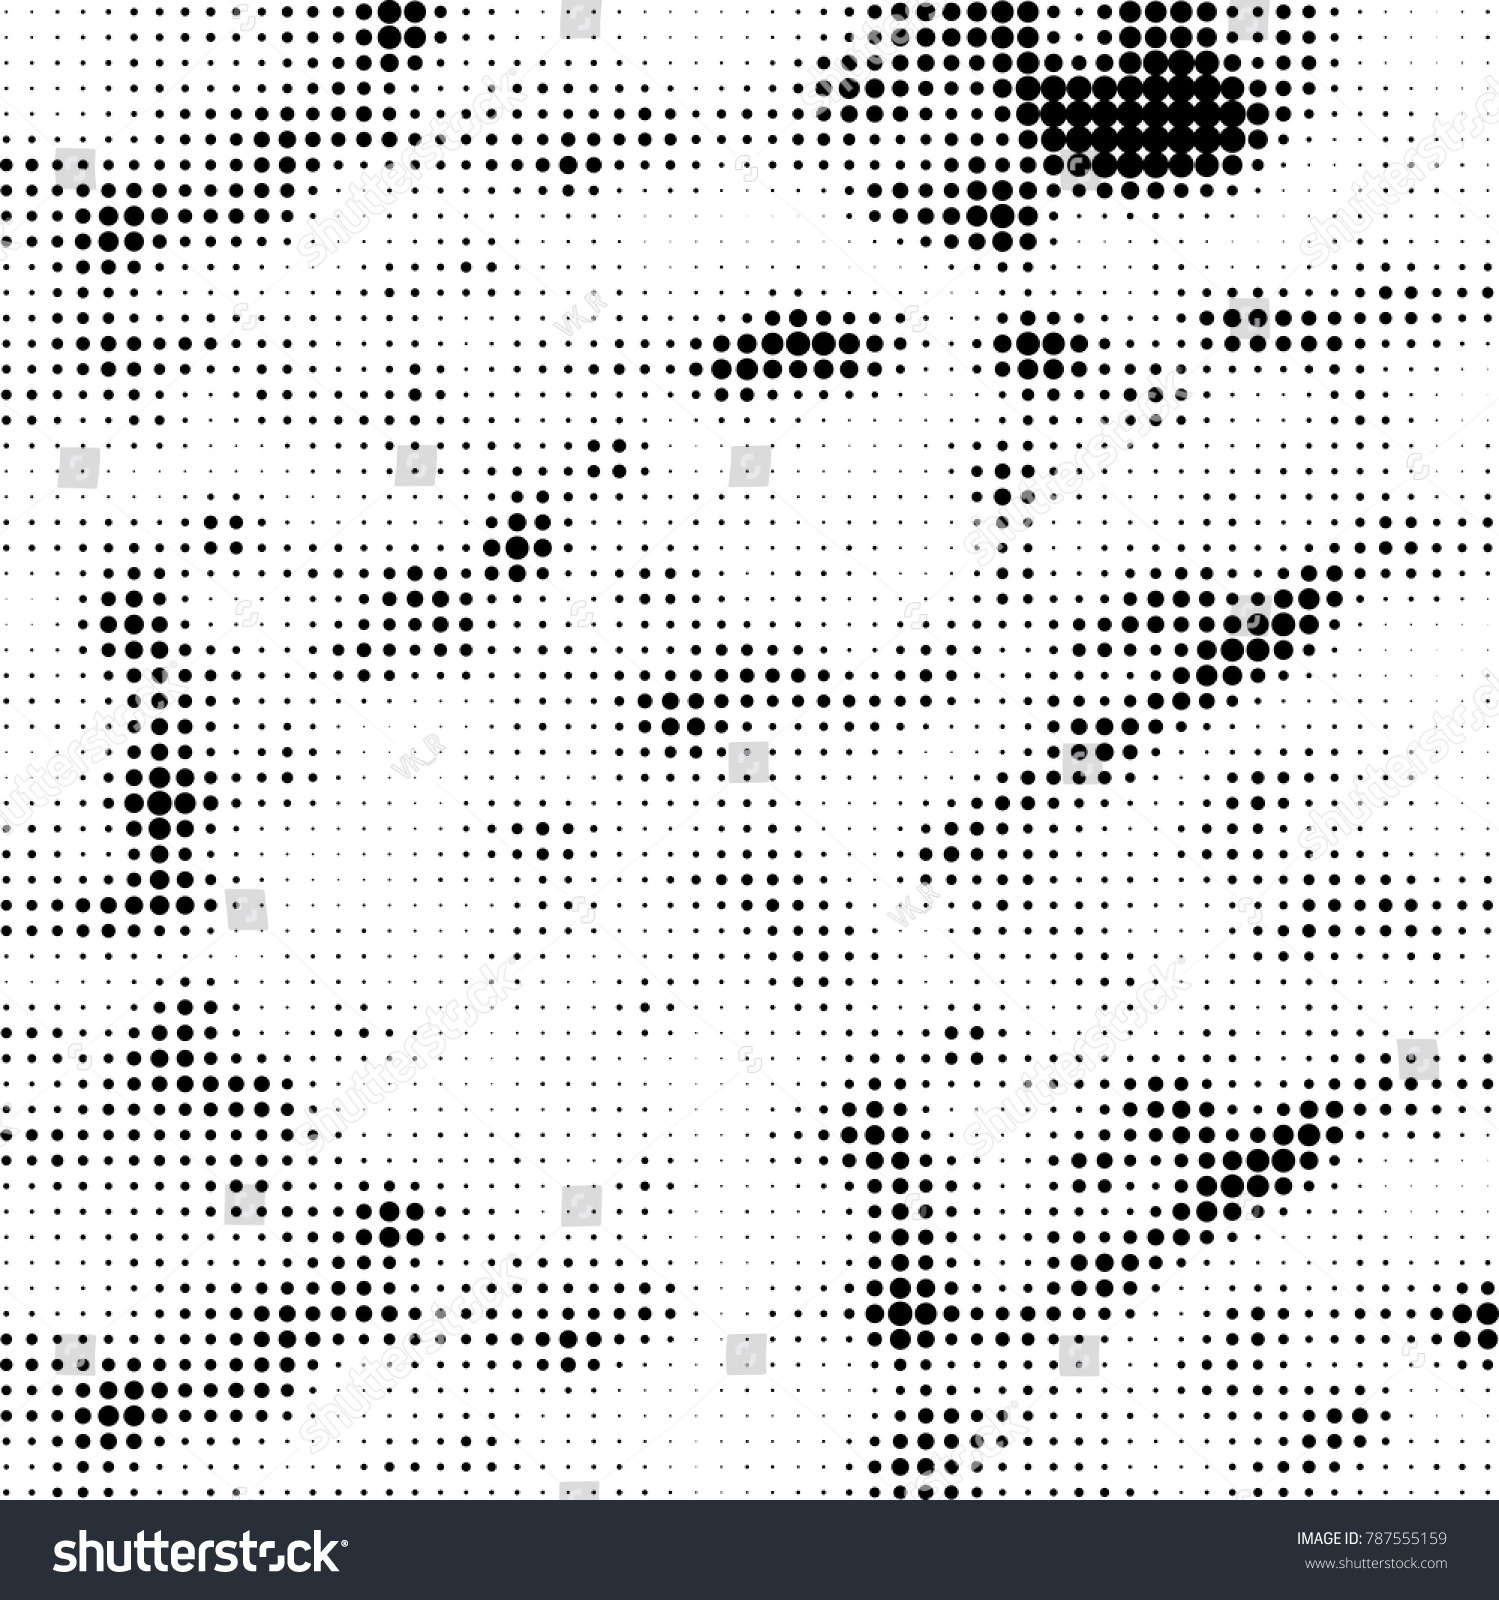 Abstract halftone background. Texture of dots of ink. Monochrome vector grunge pattern black and white #787555159